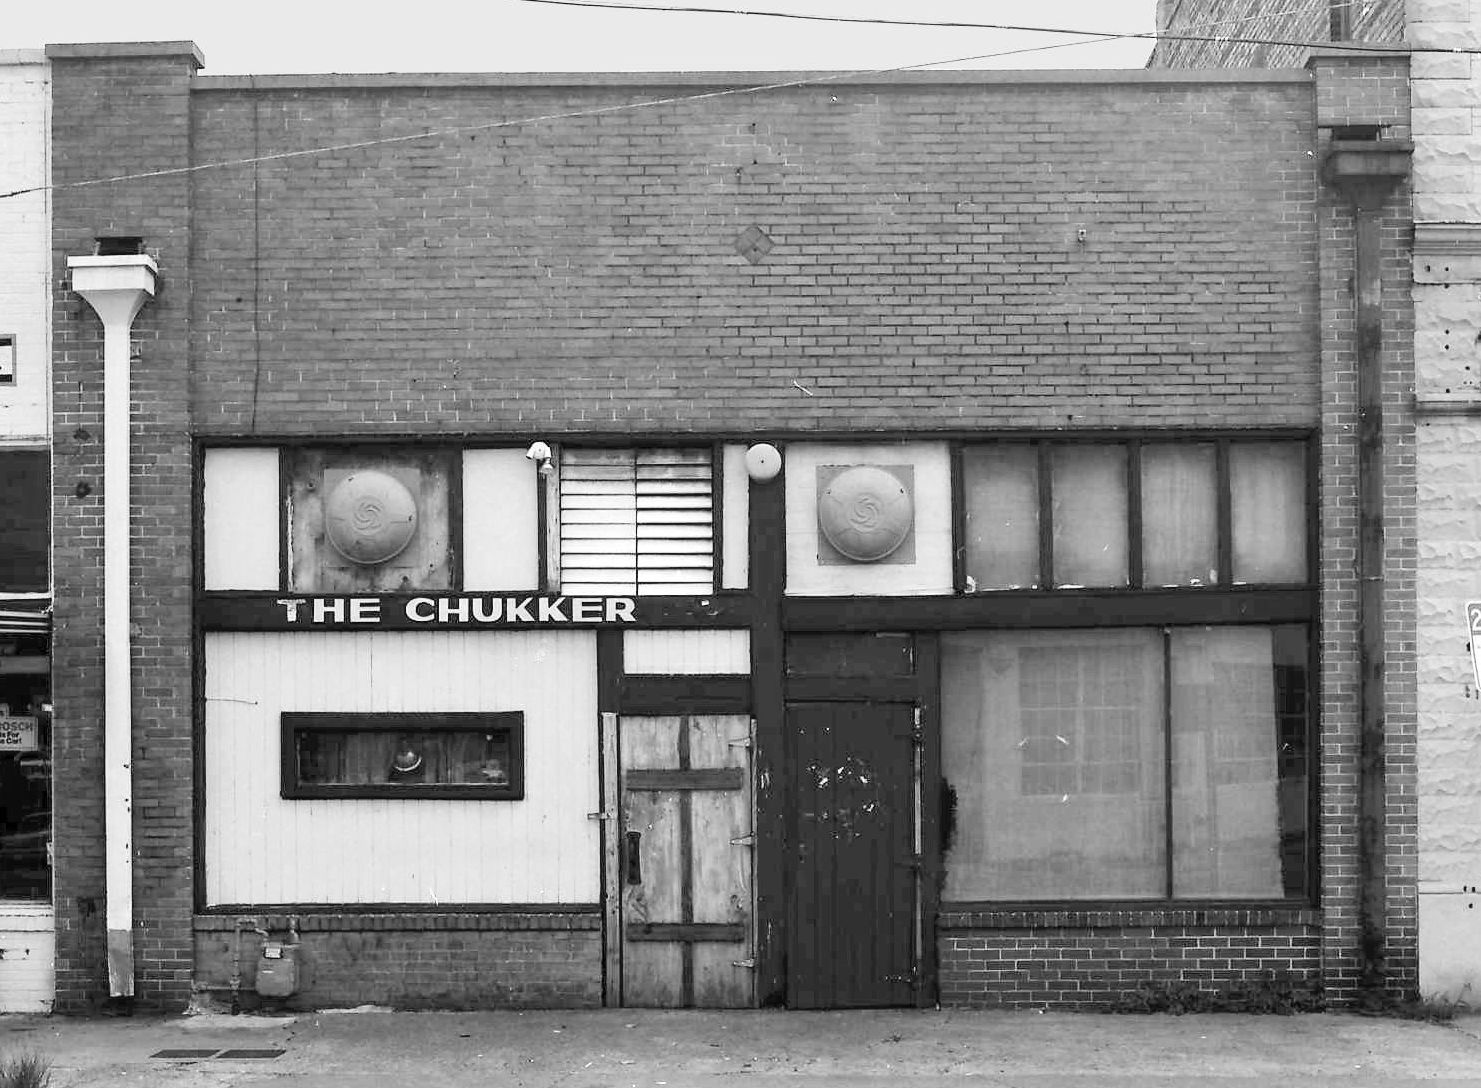 Chukker exterior as it appeared during the 1970s and 1980s